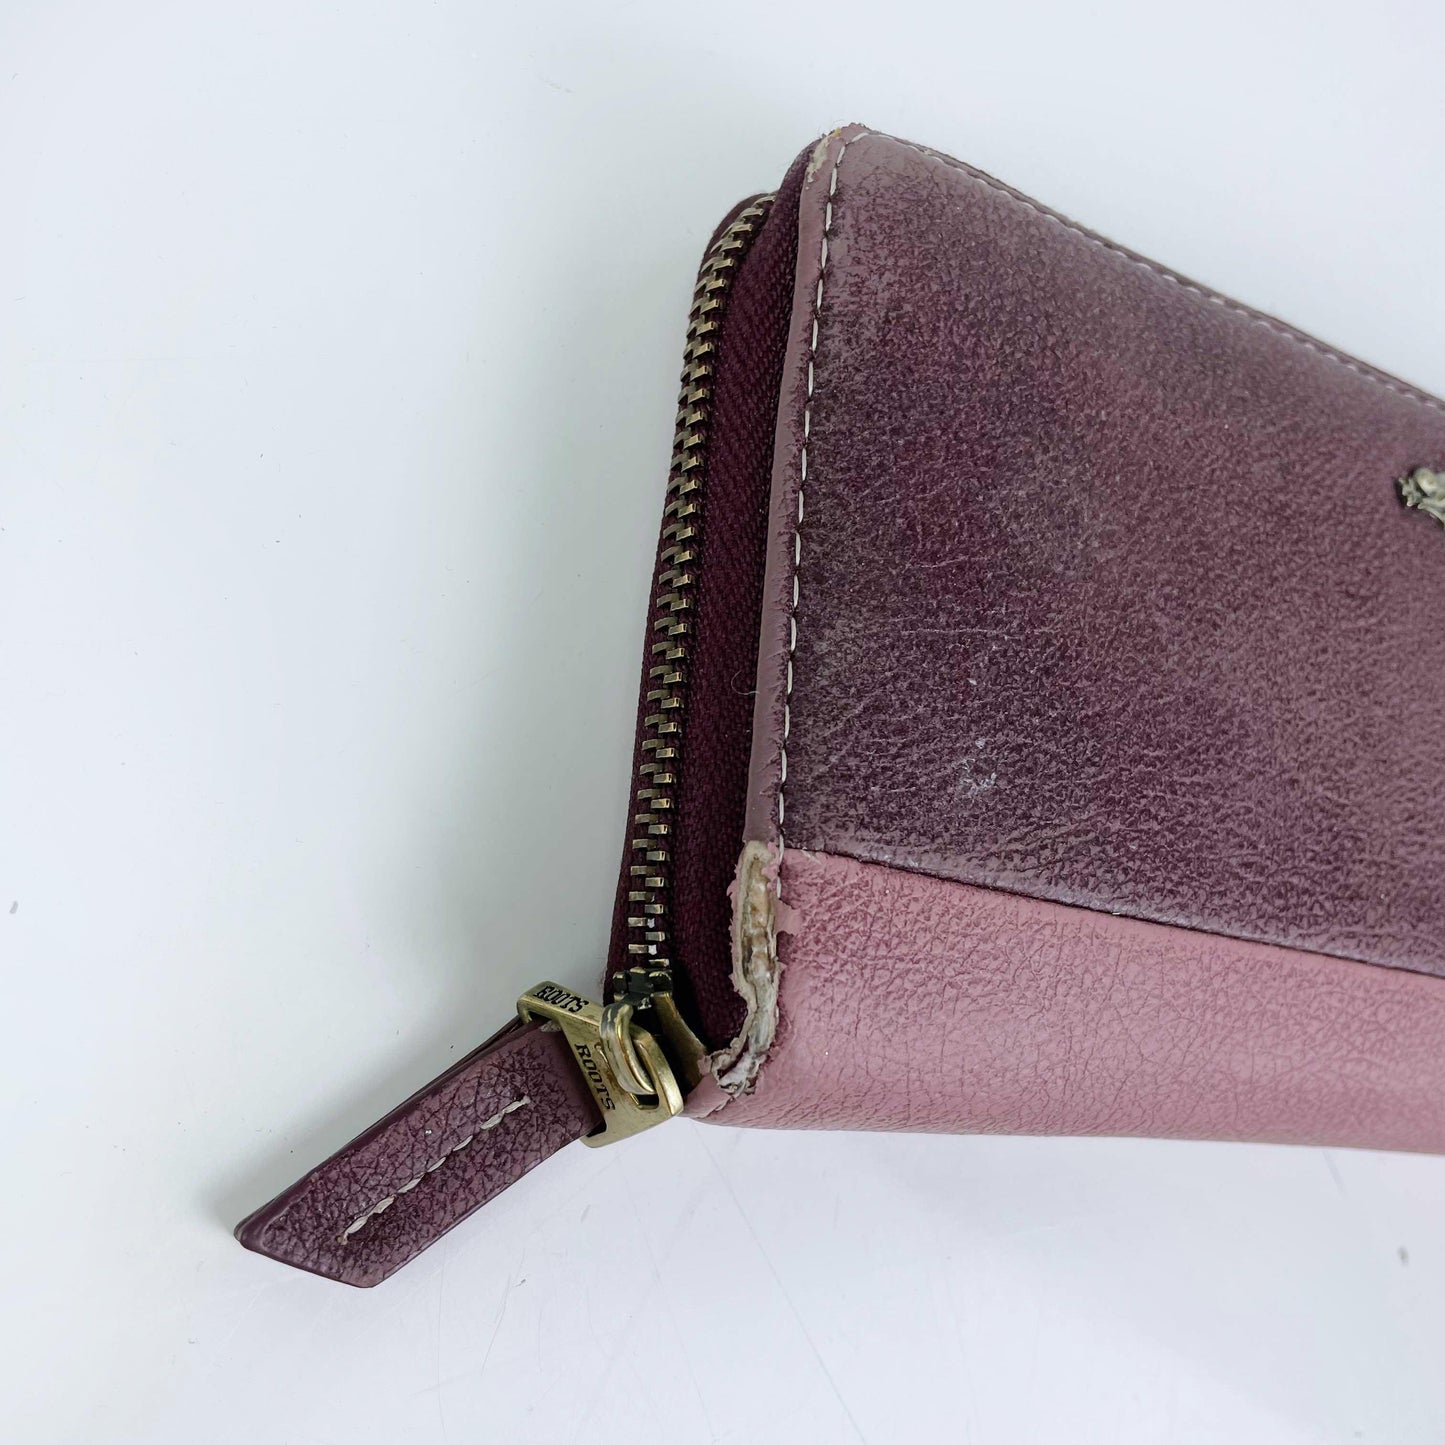 roots faux pebbled leather zip around wallet